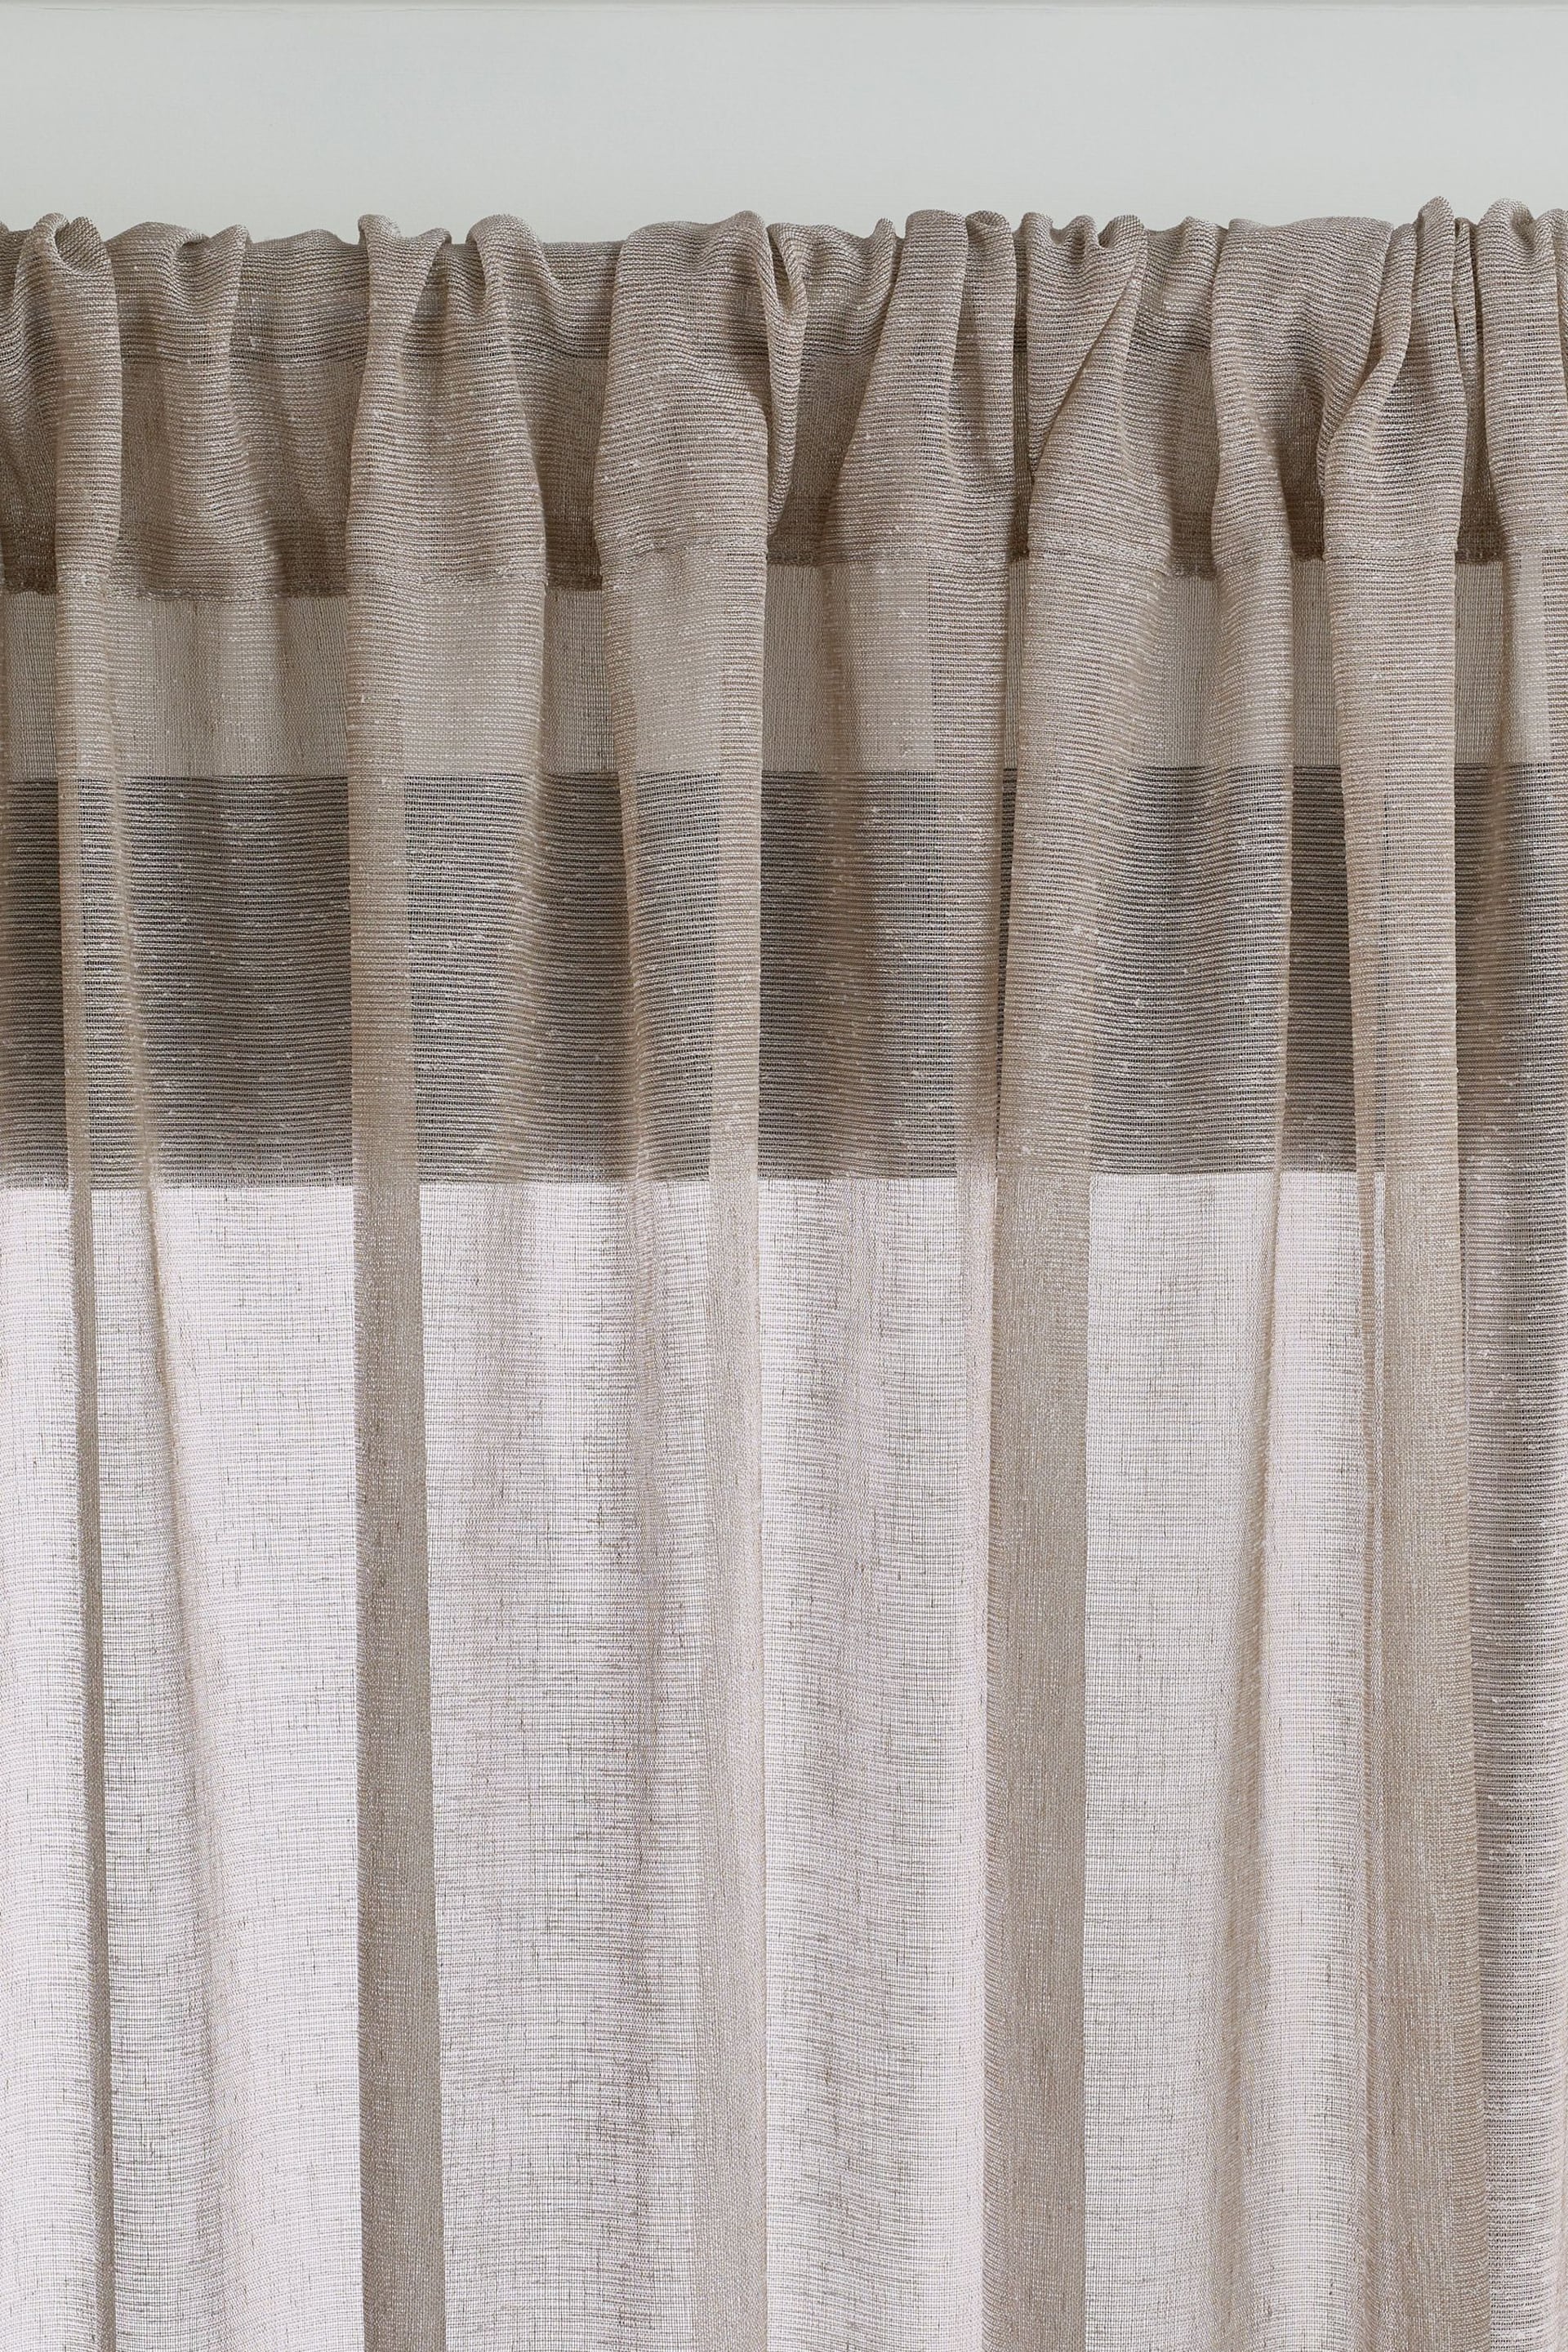 Natural Linen Look Voile Slot Top Sheer Panel Curtain - Image 3 of 4